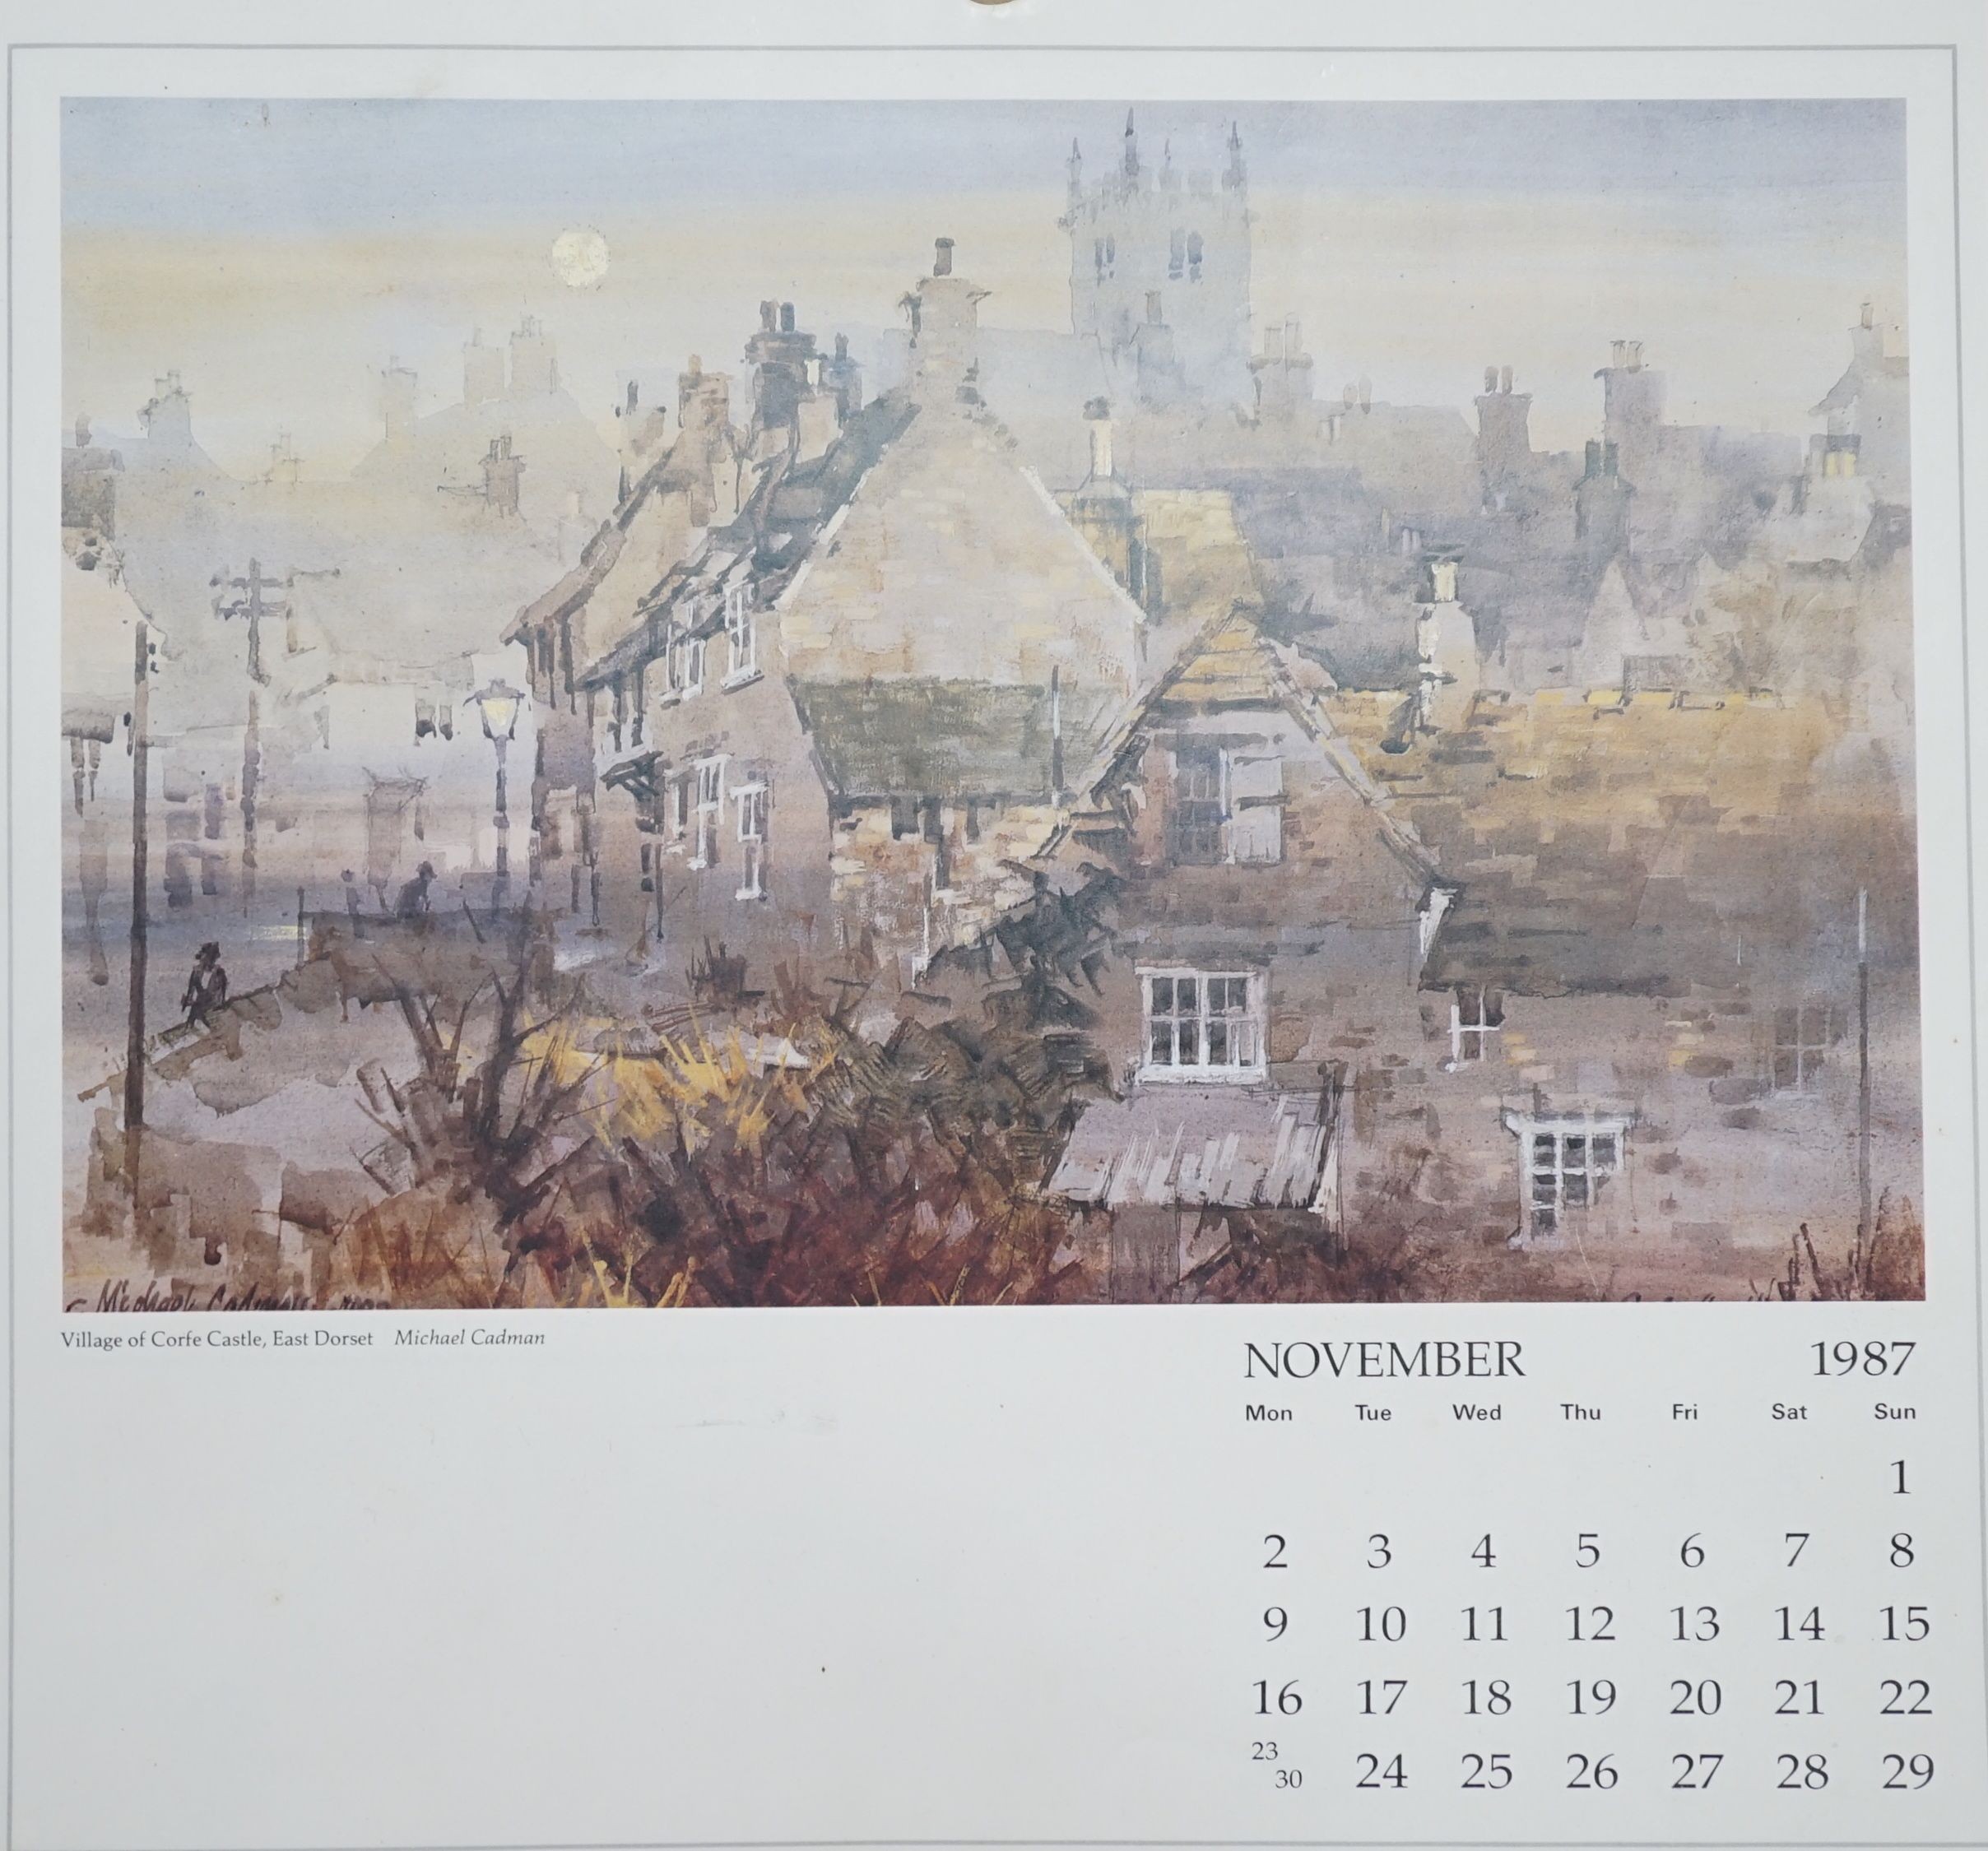 Michael Cadman (1920-2012), 10 assorted calendars featuring the work of the artist, 1970s – 1990s